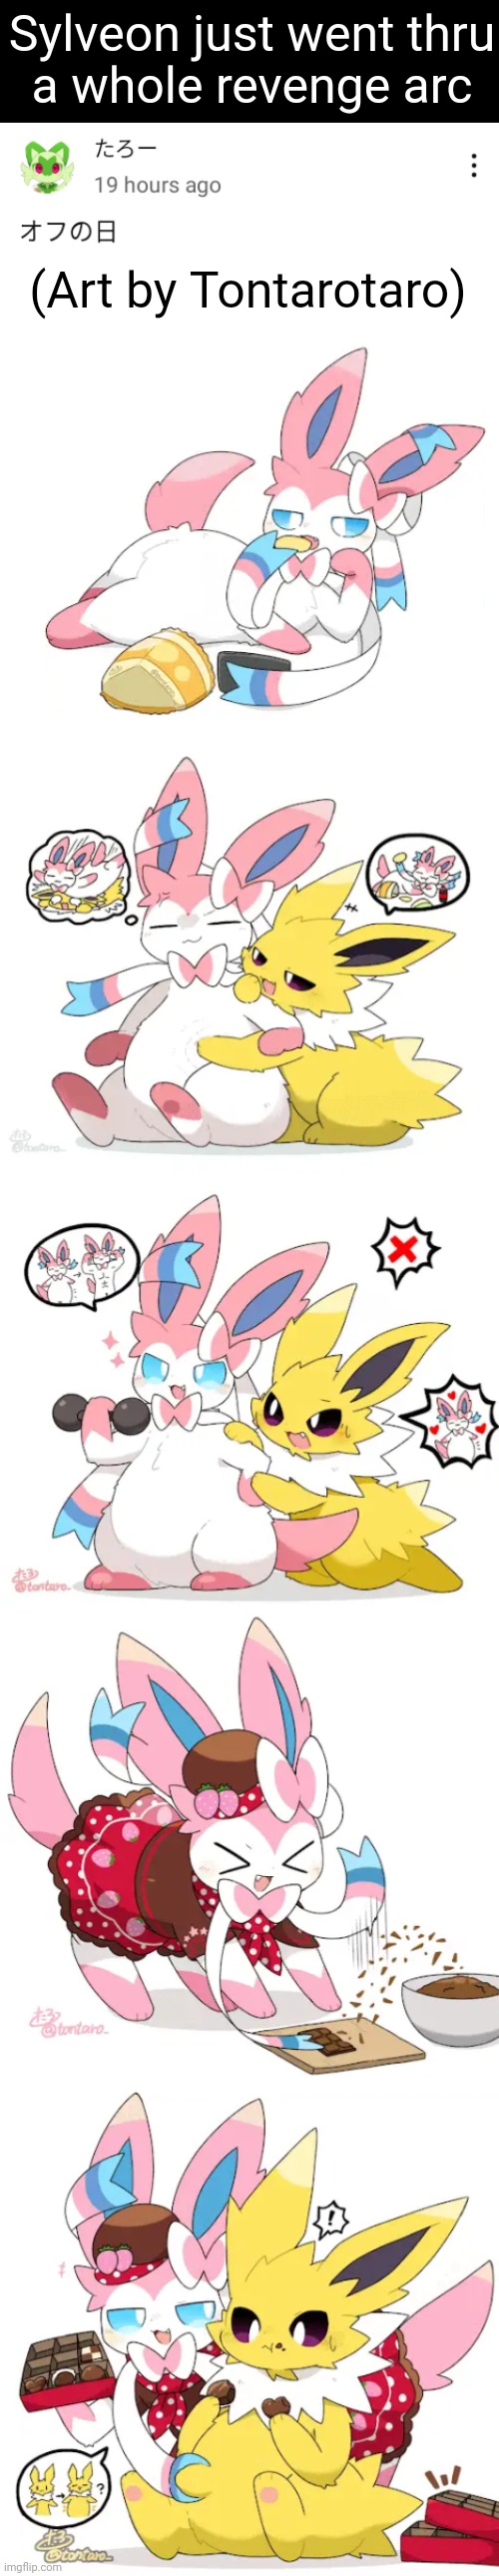 Happy Sylveon Day | Sylveon just went thru
a whole revenge arc; (Art by Tontarotaro) | image tagged in sylveon,jolteon | made w/ Imgflip meme maker